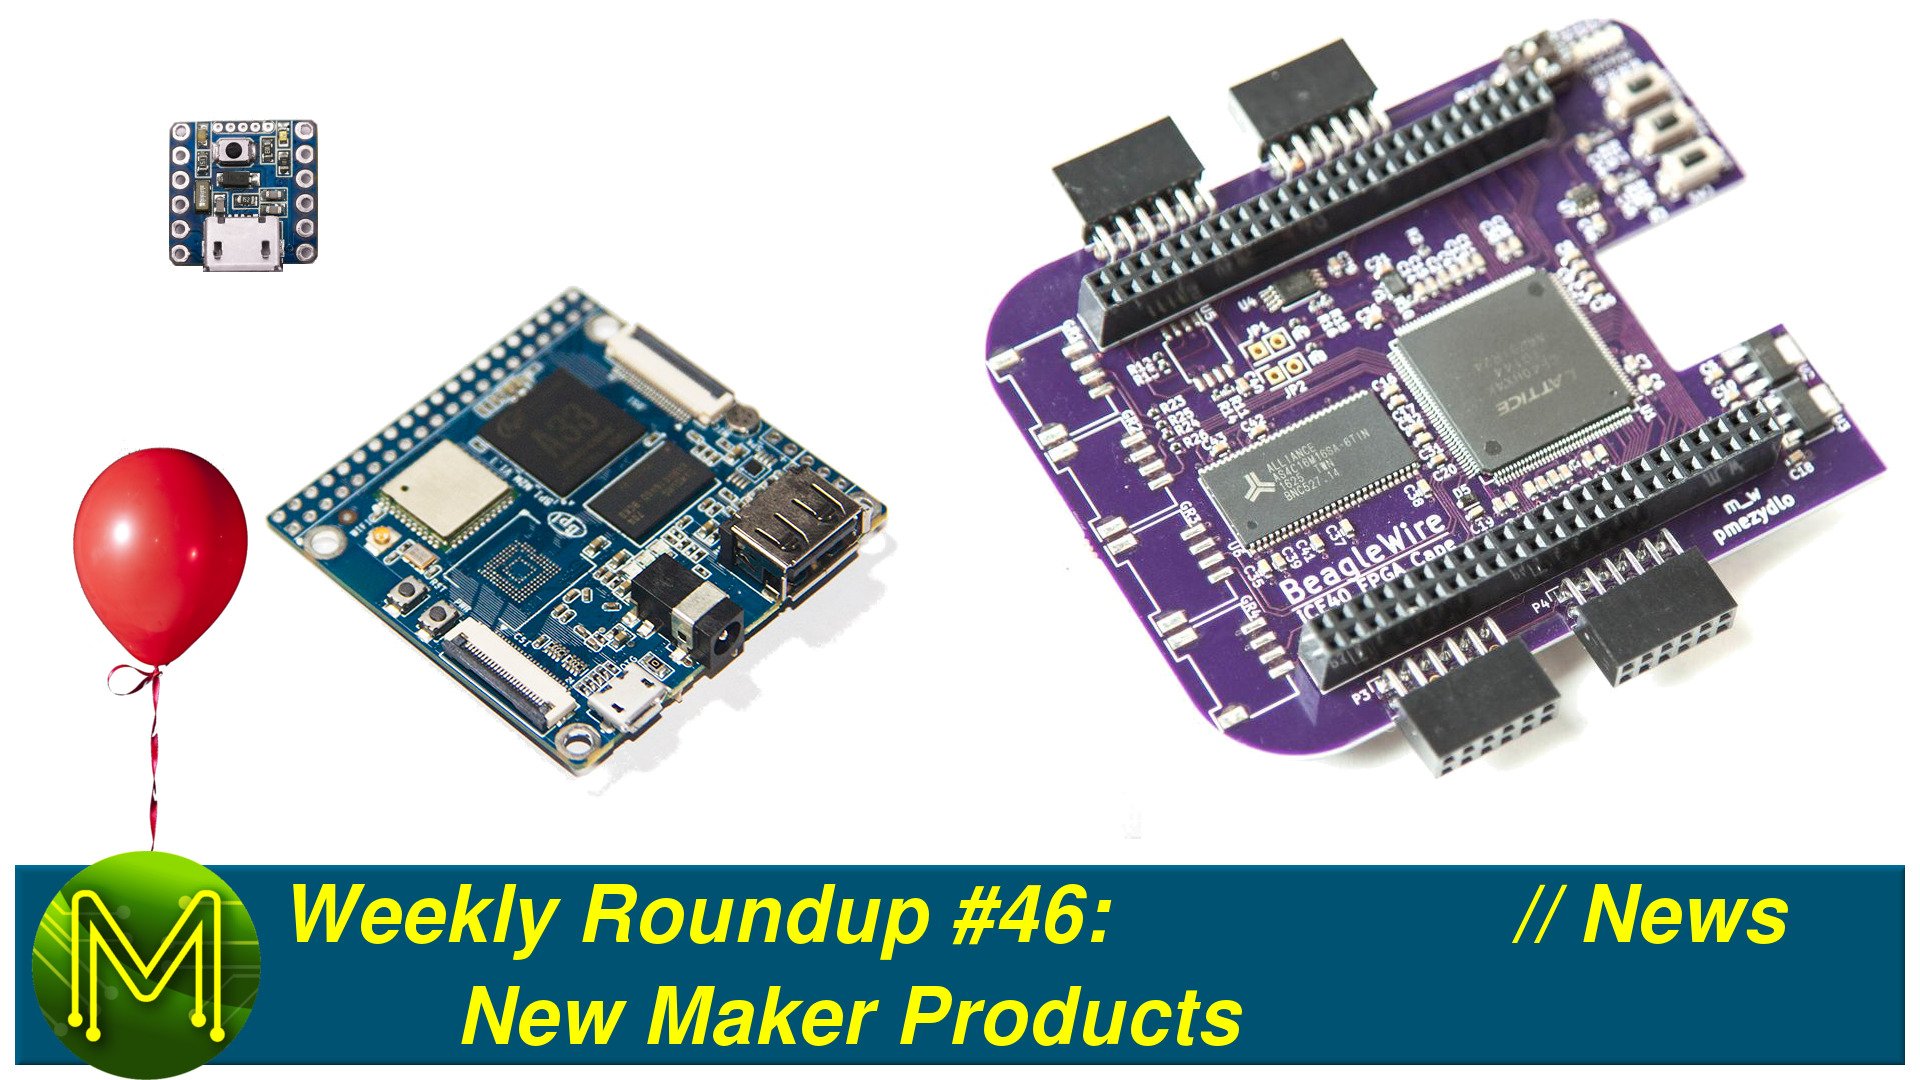 Weekly Roundup #46 - New Maker Products // News